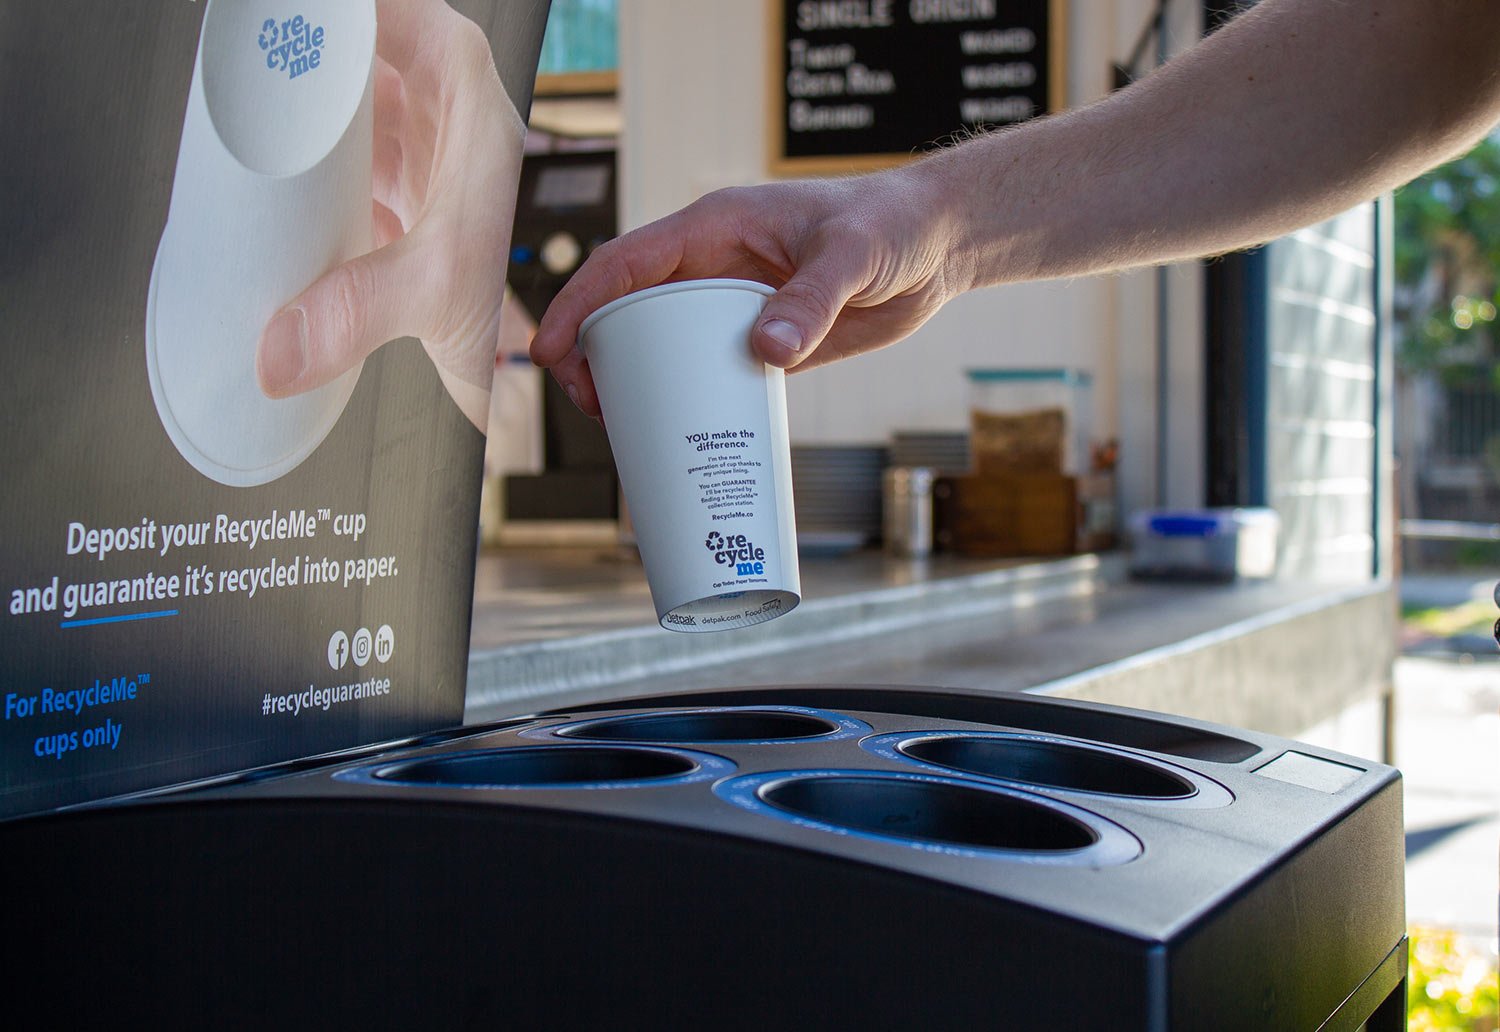 Image of a RecycleMe Collection station, paired with a Seven Miles Coffee